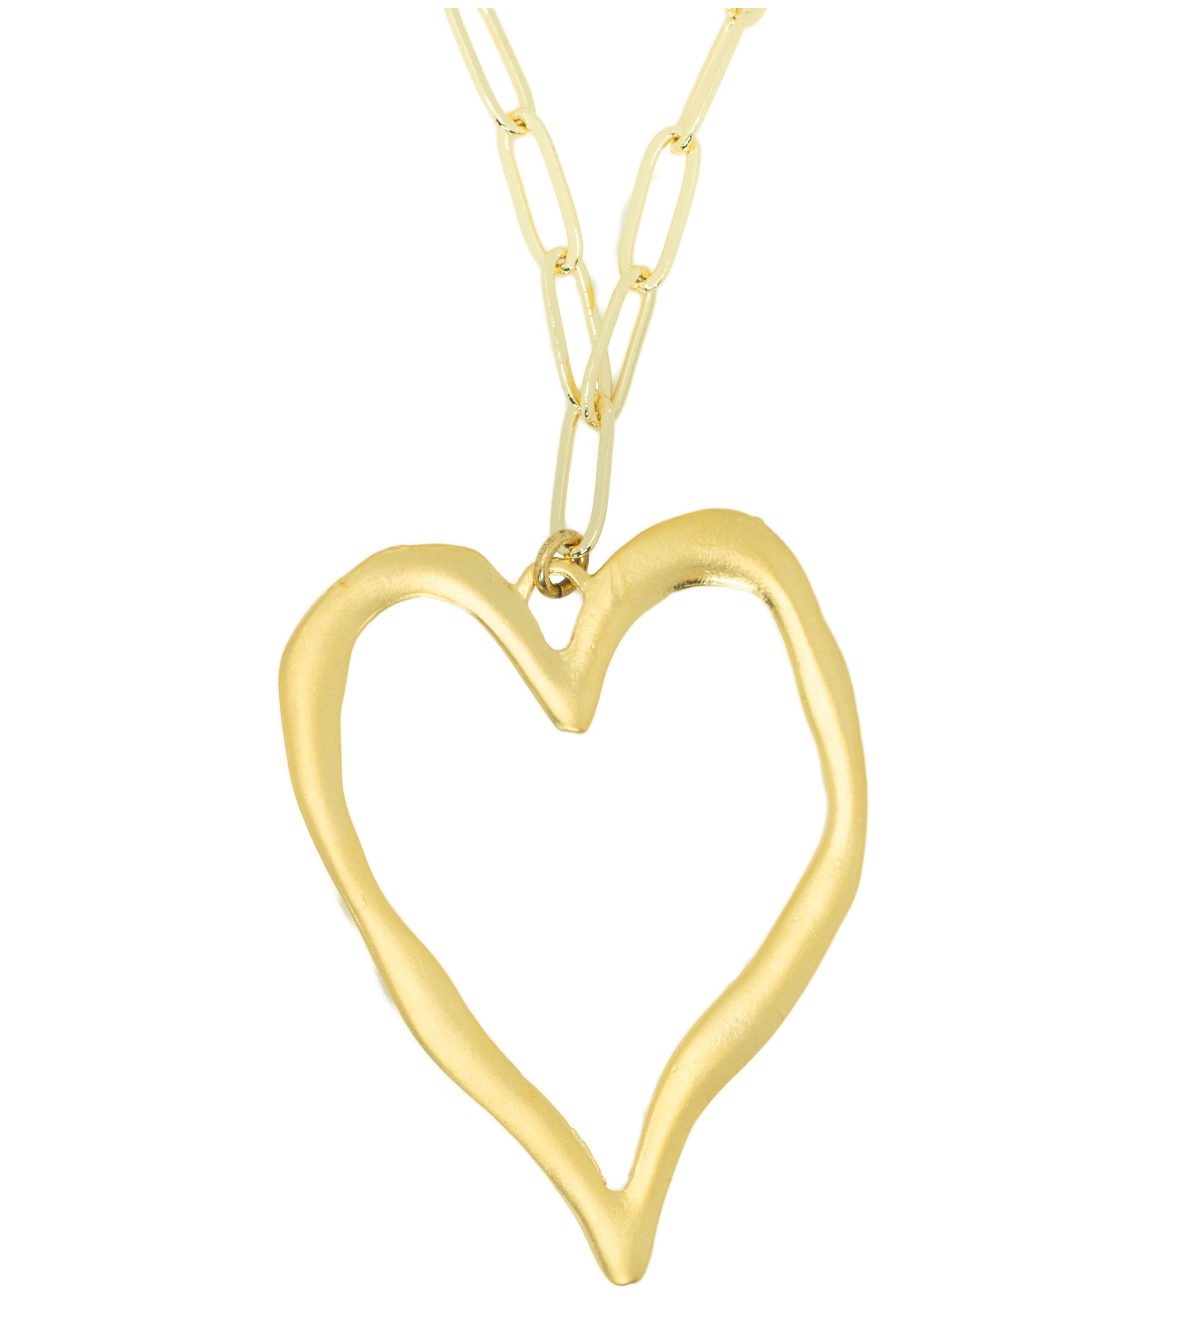 The Large Gold Paperclip Matte Heart Necklace